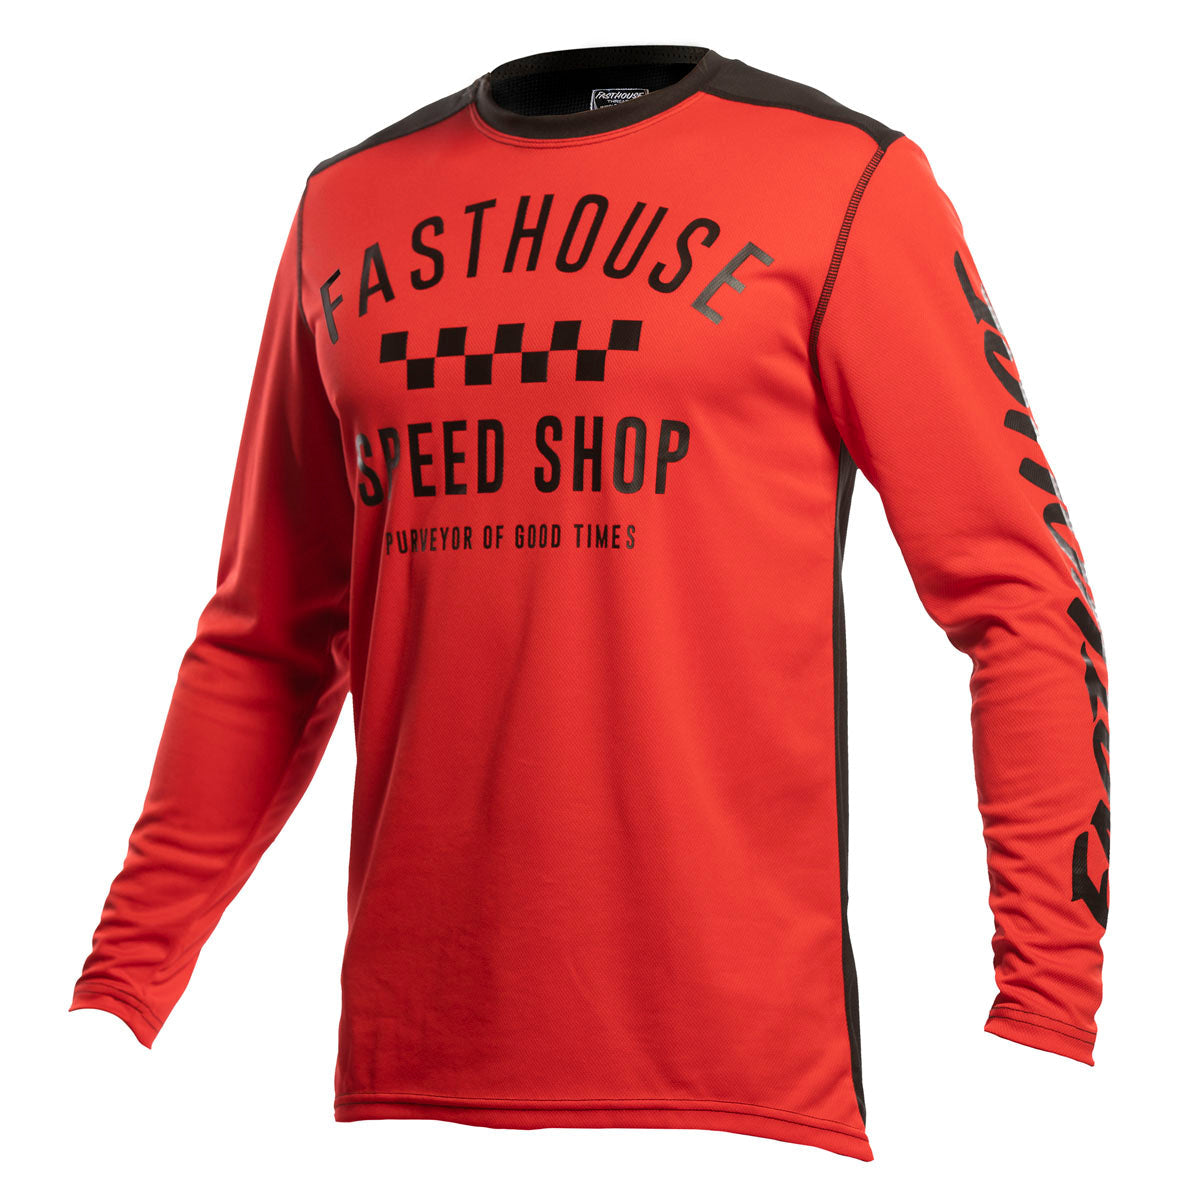 Fasthouse Carbon Jersey - Red/Black